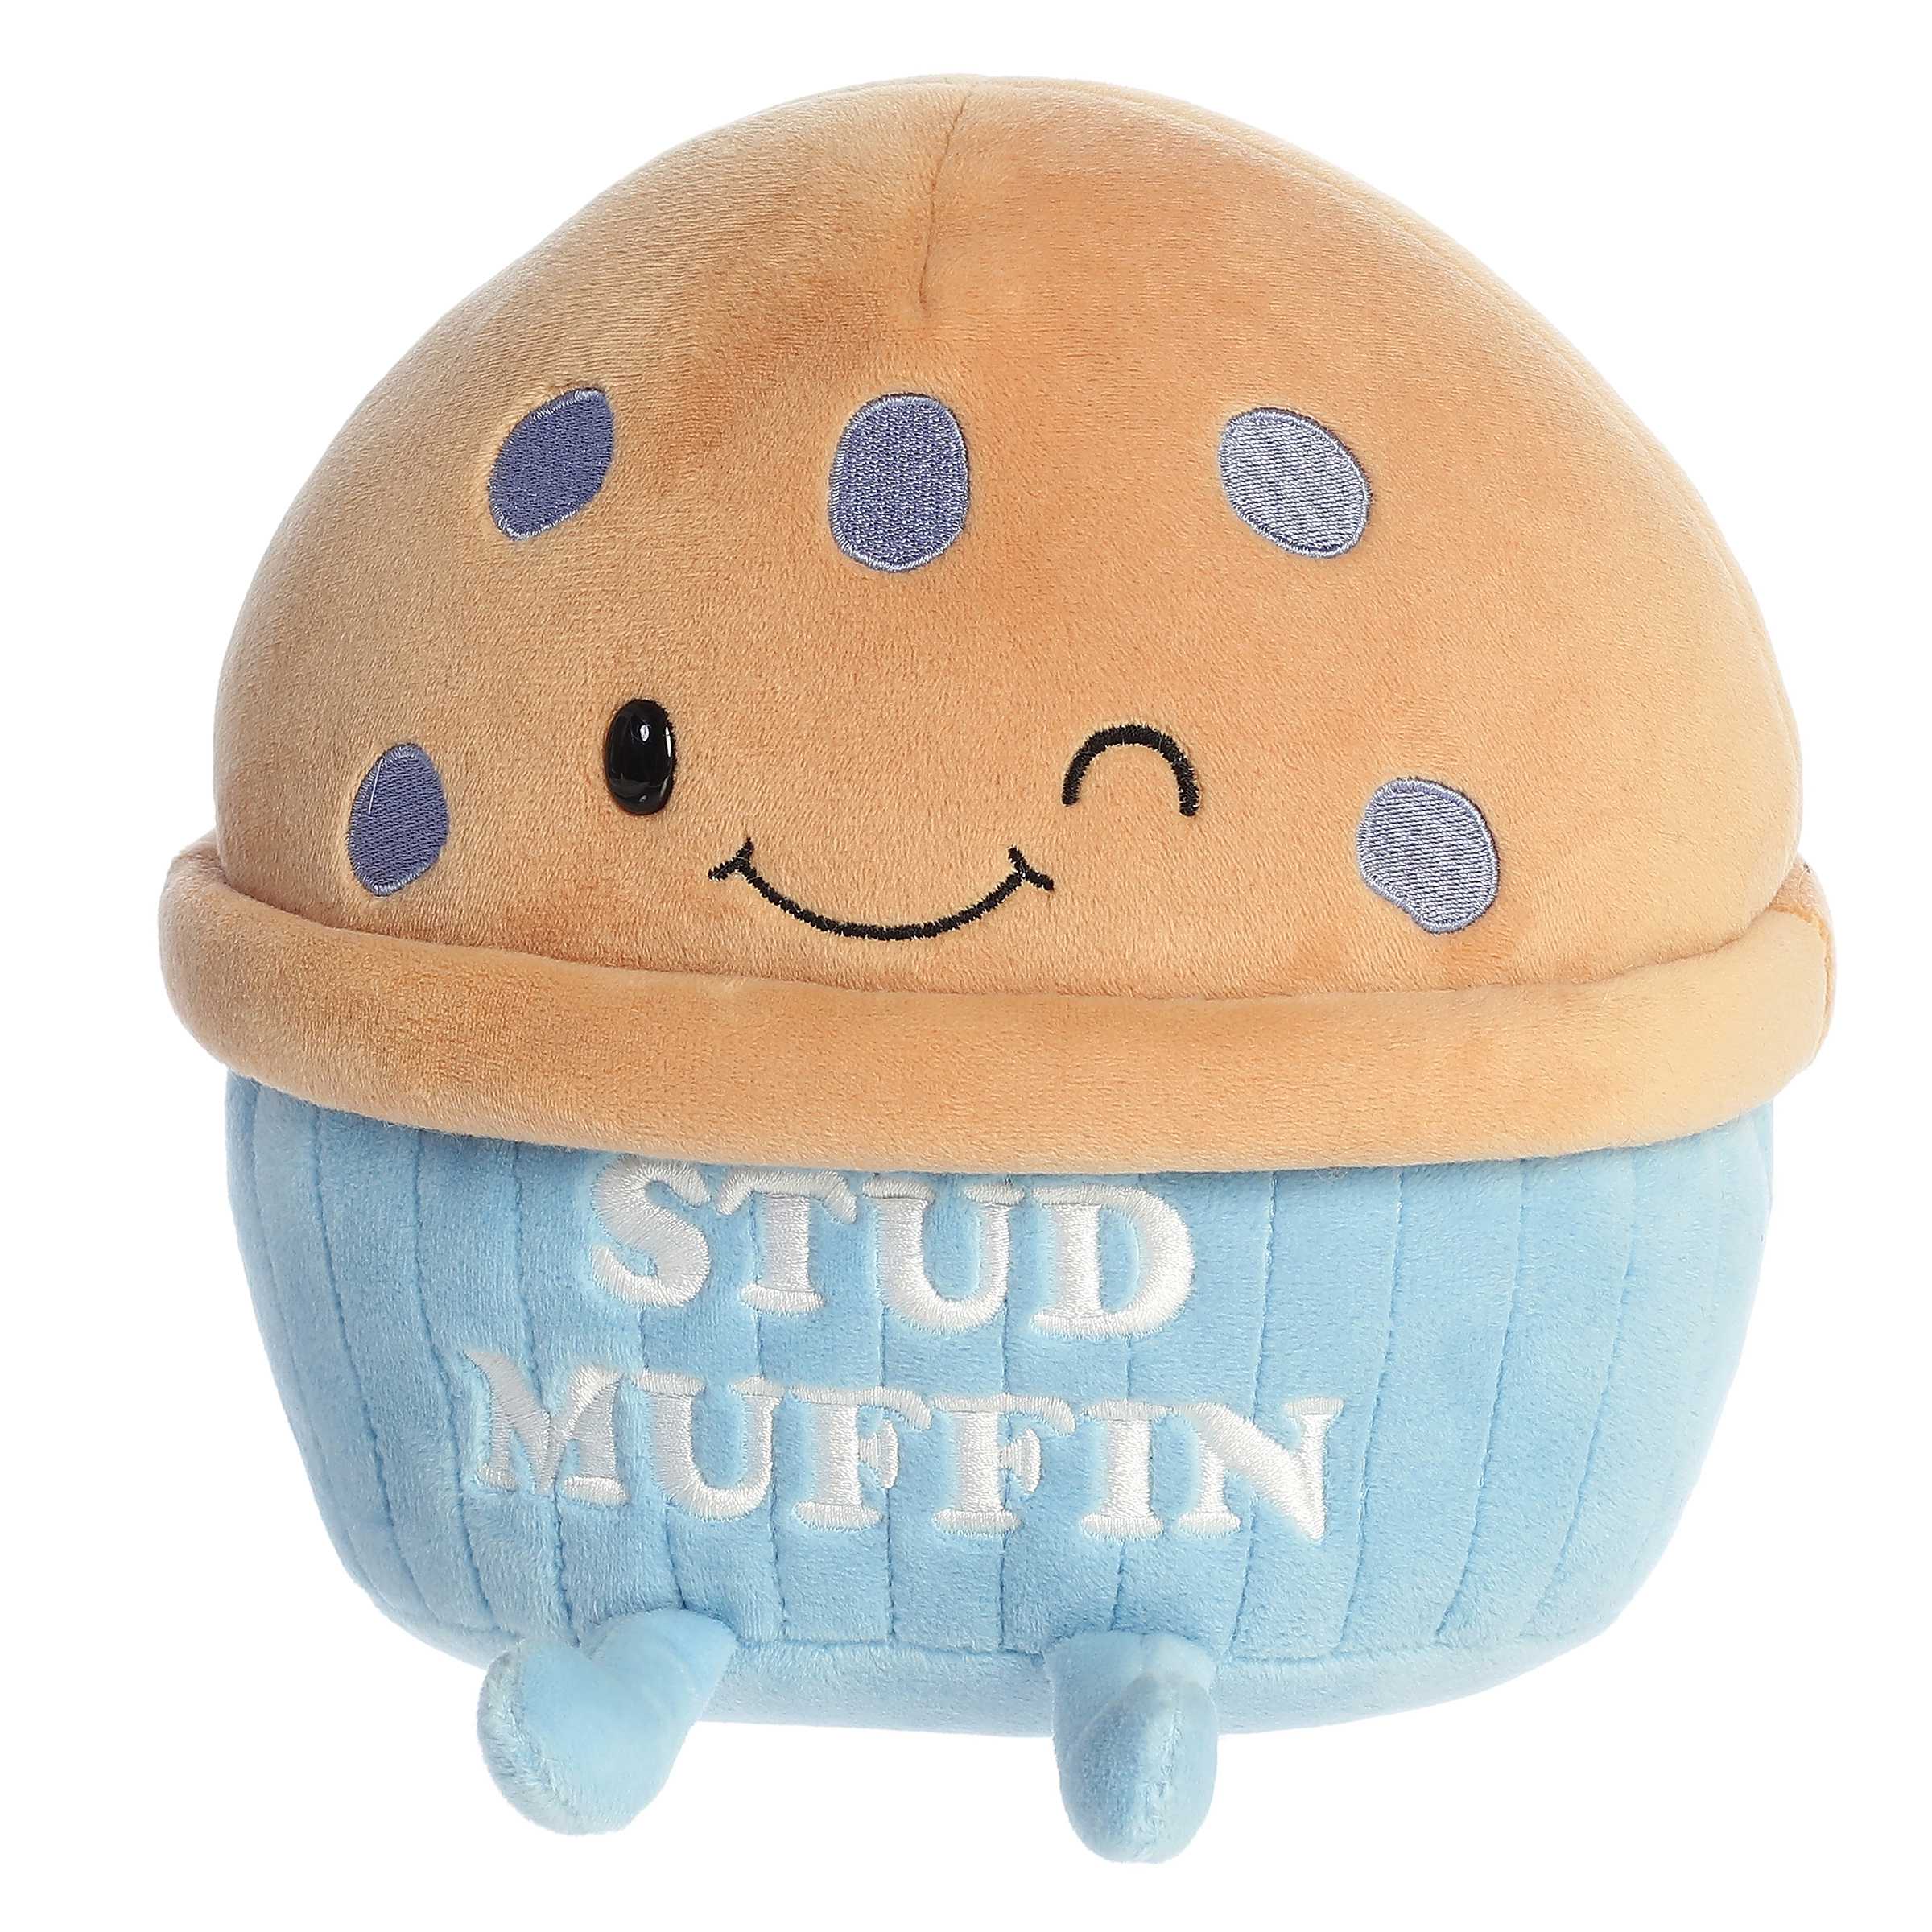 Category: Muffin Top - Put a Smile in to your Style!